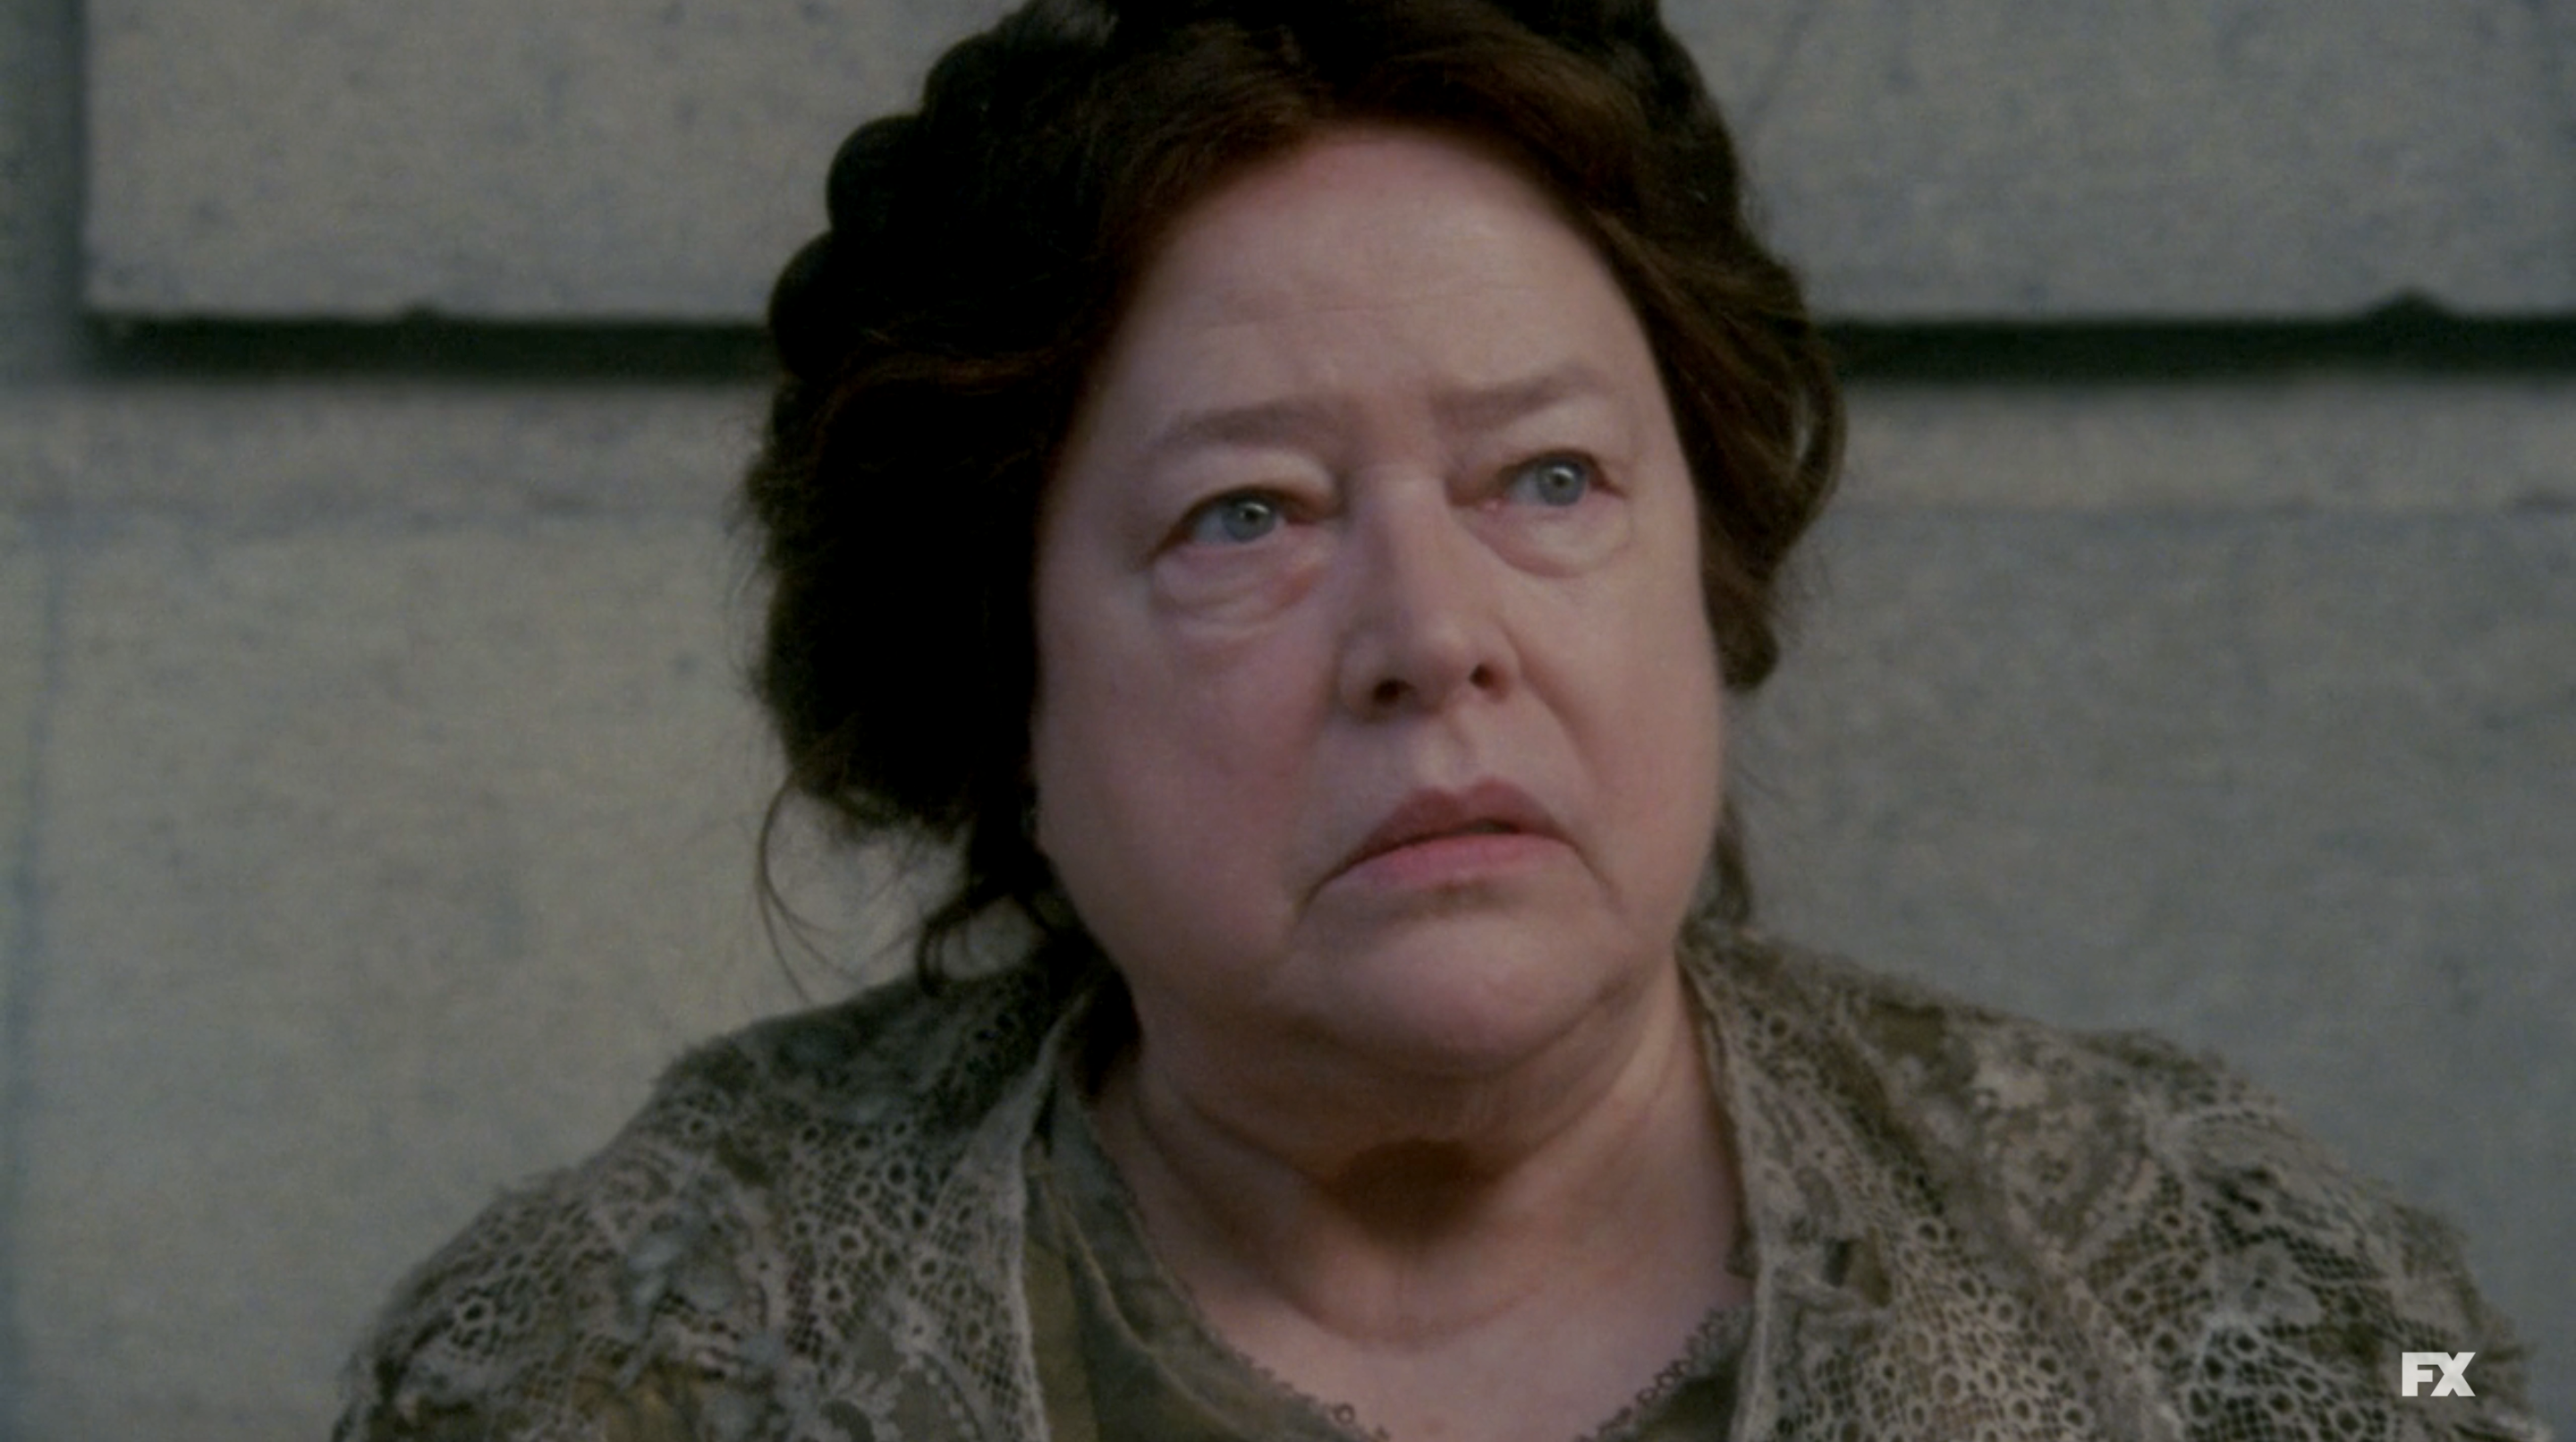 Kathy Bates as Madame Delphine staring into the distance